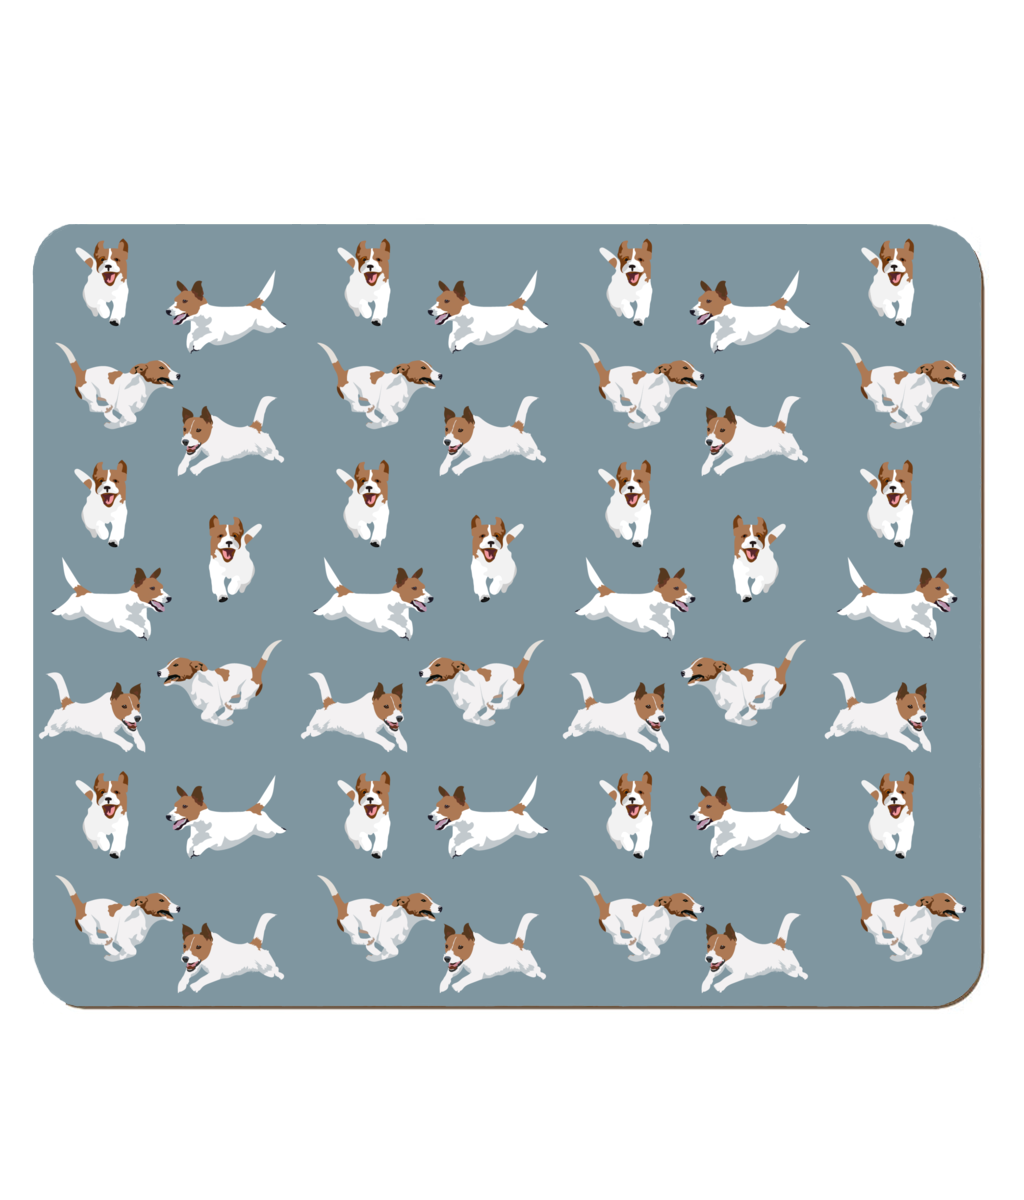 Jack Russell Placemat in Stone Blue